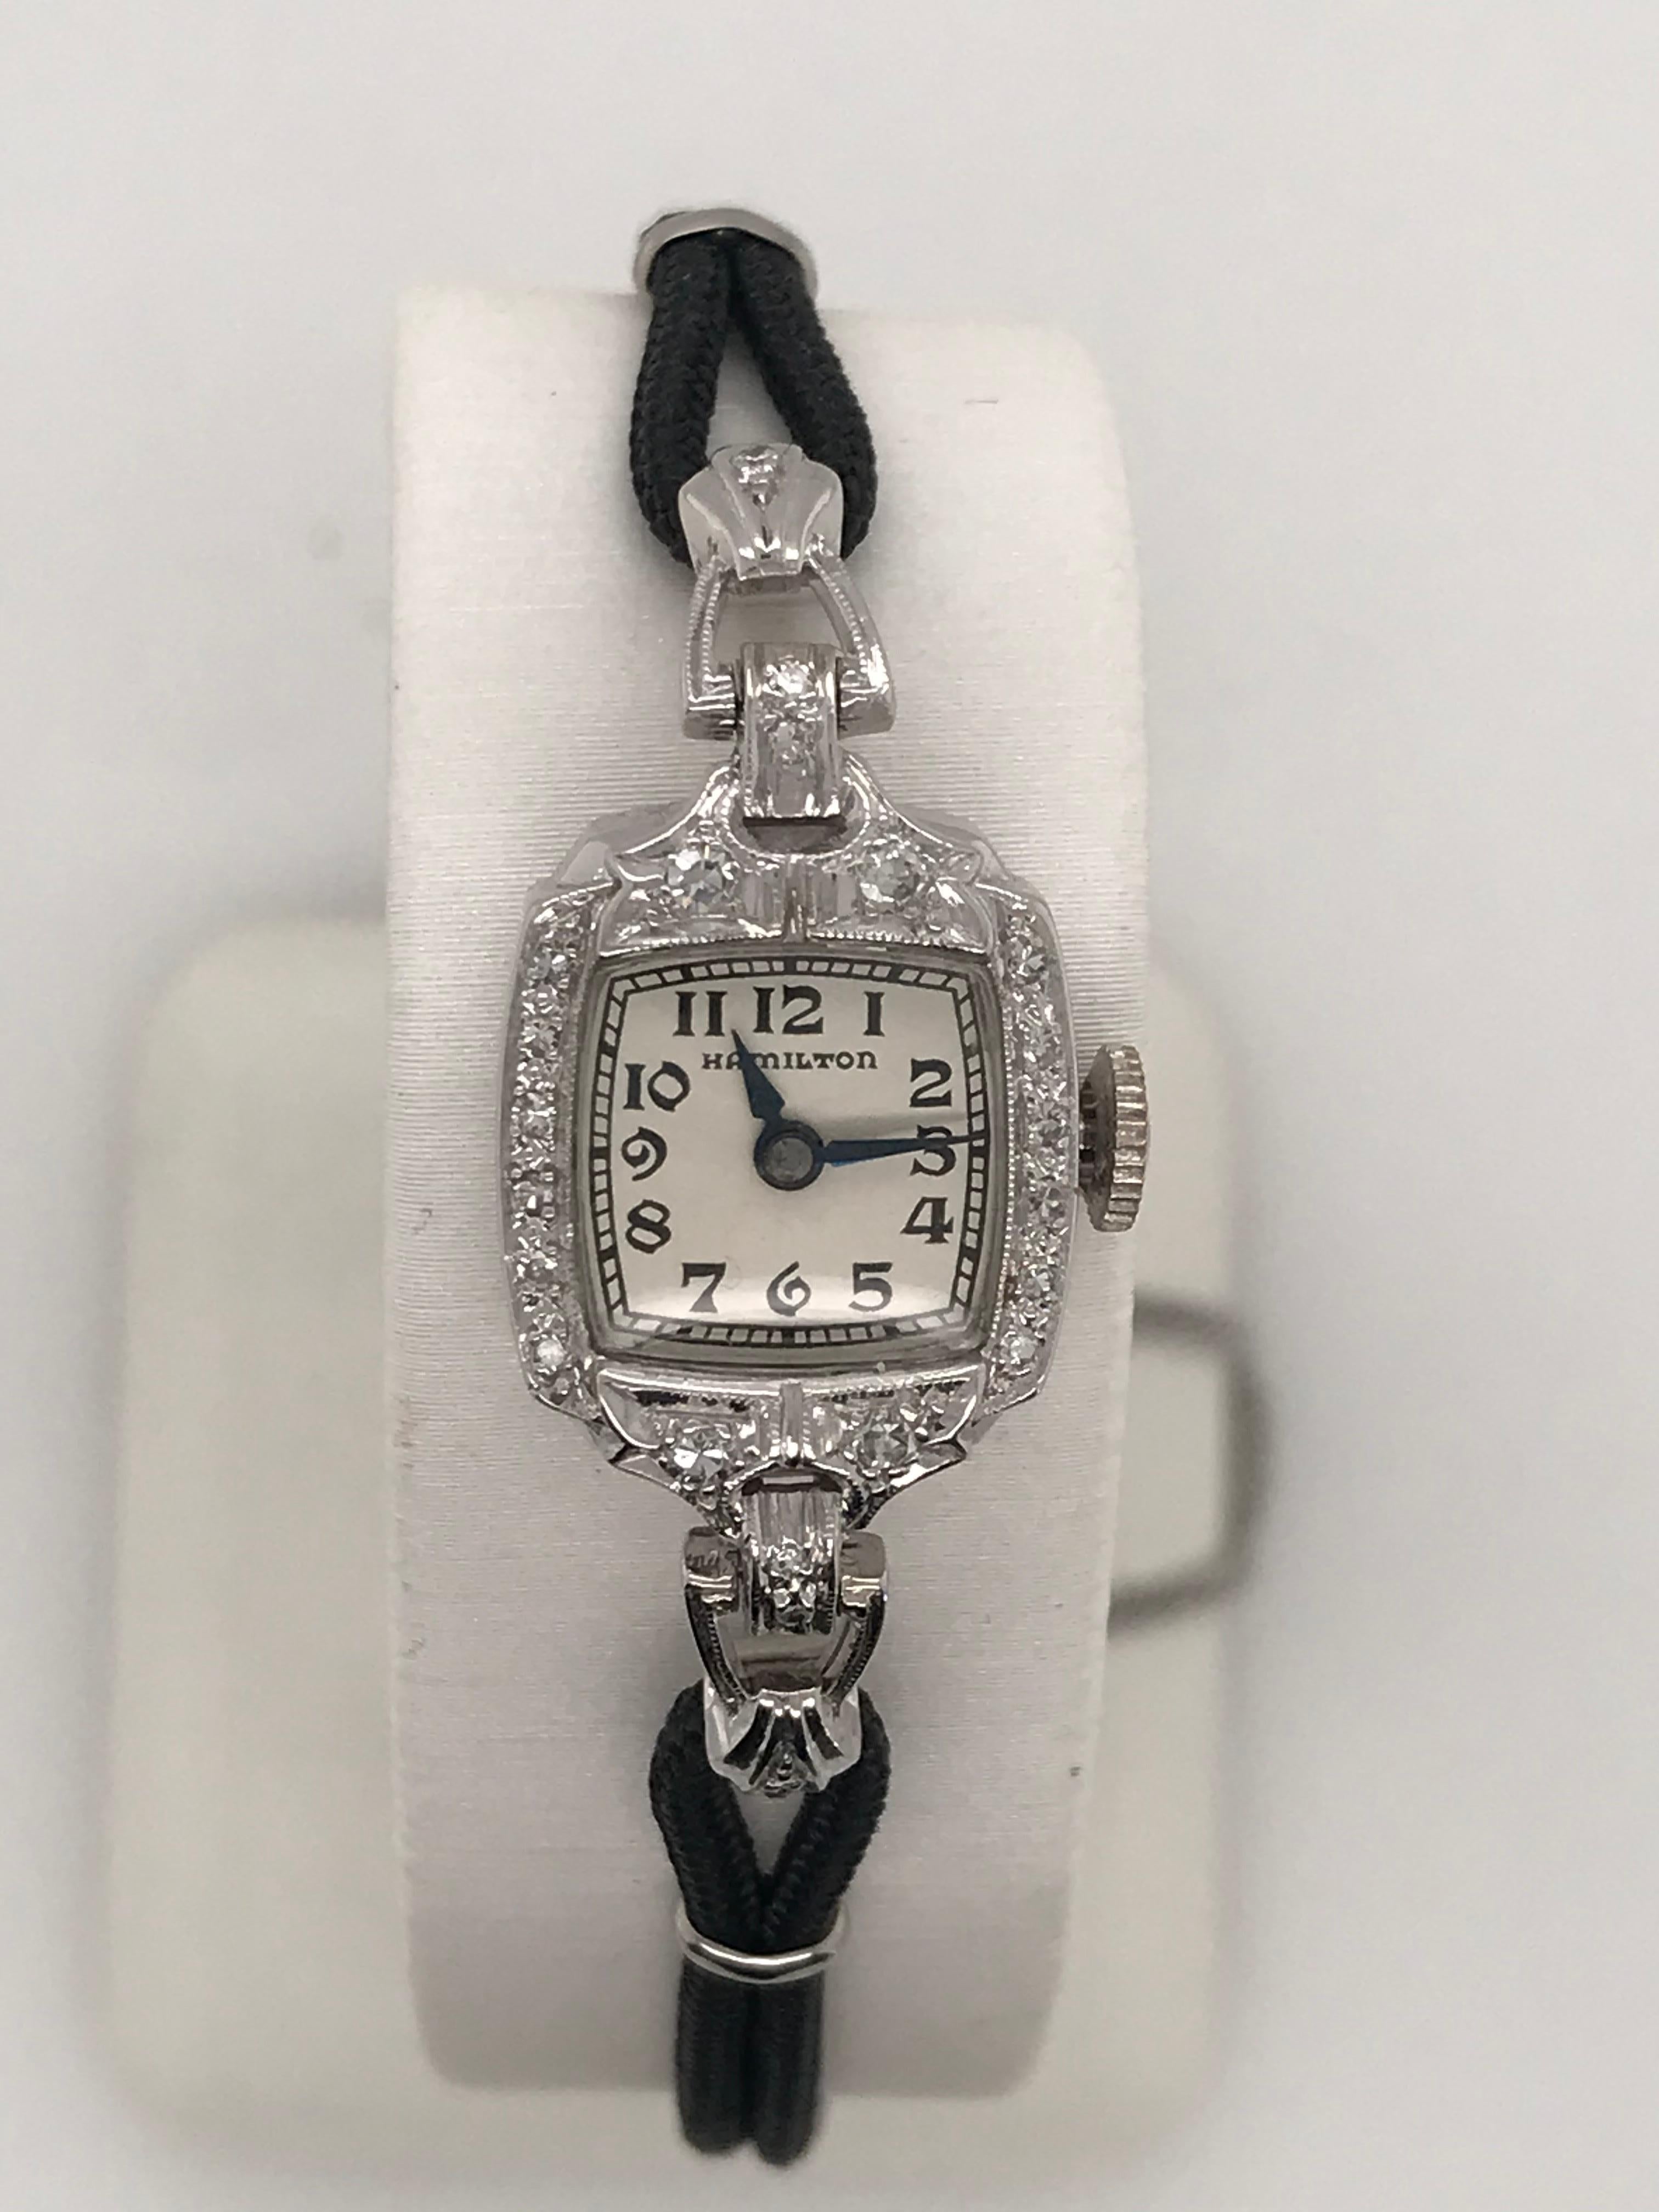 14K white gold lady's Hamilton watch 17 jewel manual wind watch with black cord strap and 20 single cut diamonds=.20cts total weight.  This watch also has a white chain connected to the fold-over clasp.  This petite timepiece will add a touch of